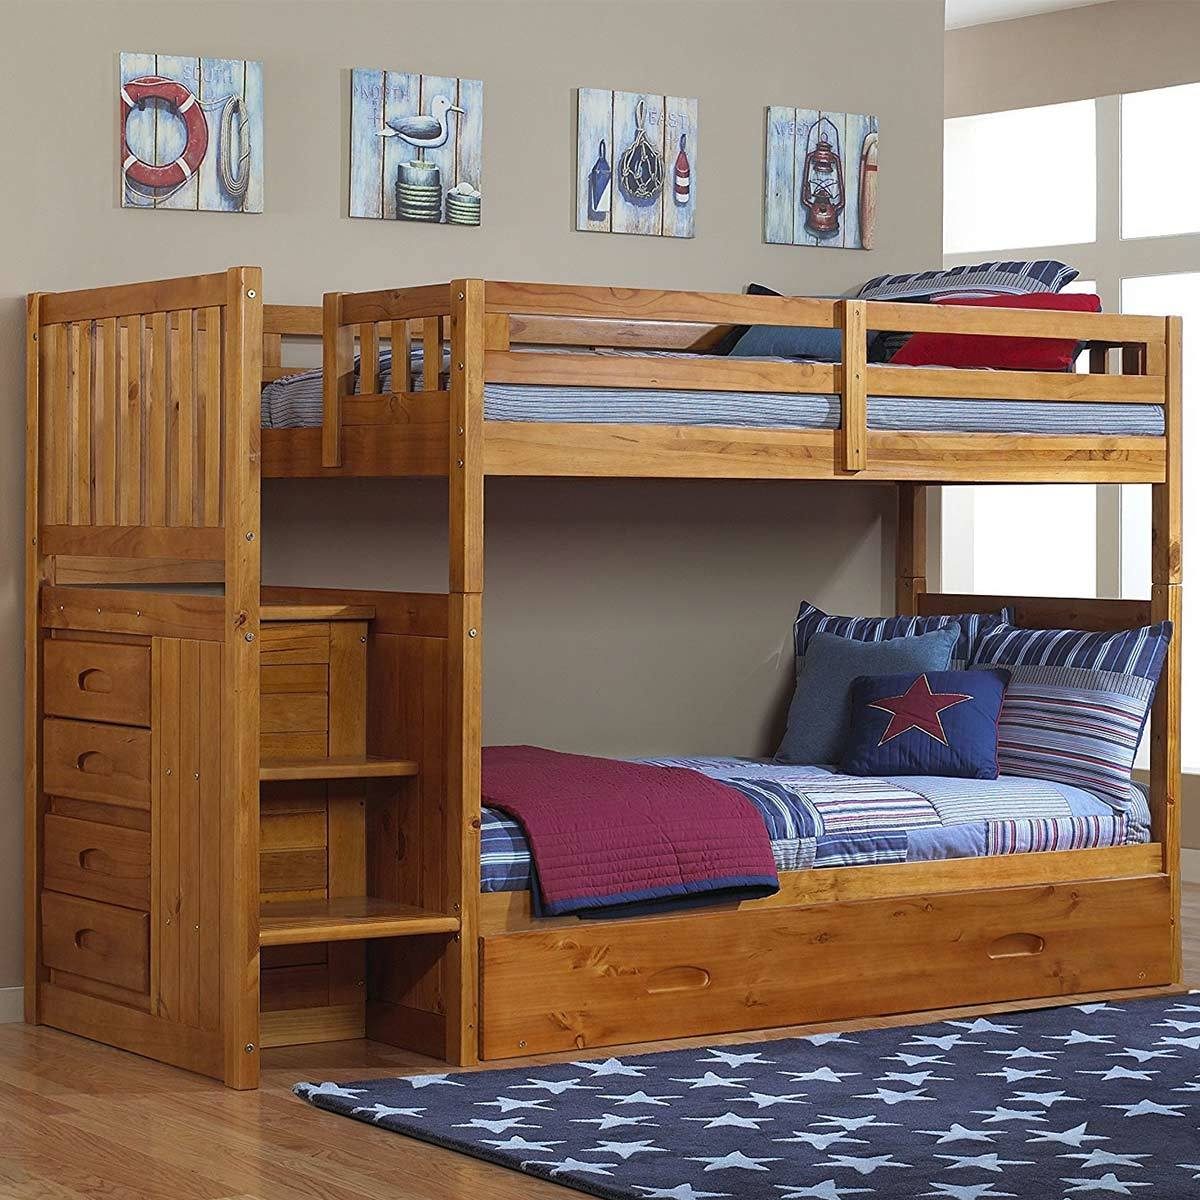 awesome bunk beds